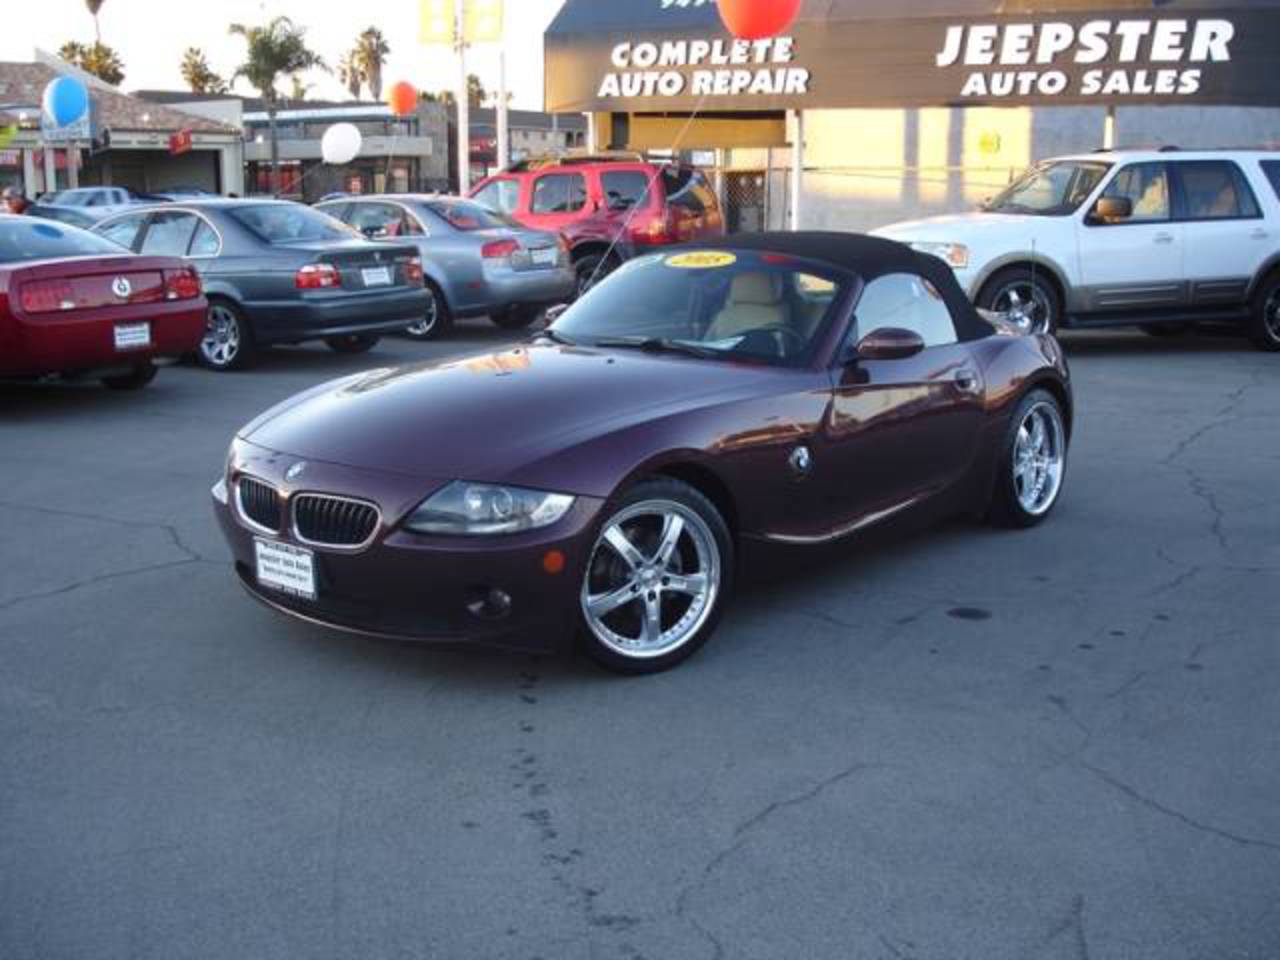 2005 BMW Z4 25i THIS IS A BEAUTIFUL CONVERTIBLE Z4 LOADED WITH LEATHER SEATS